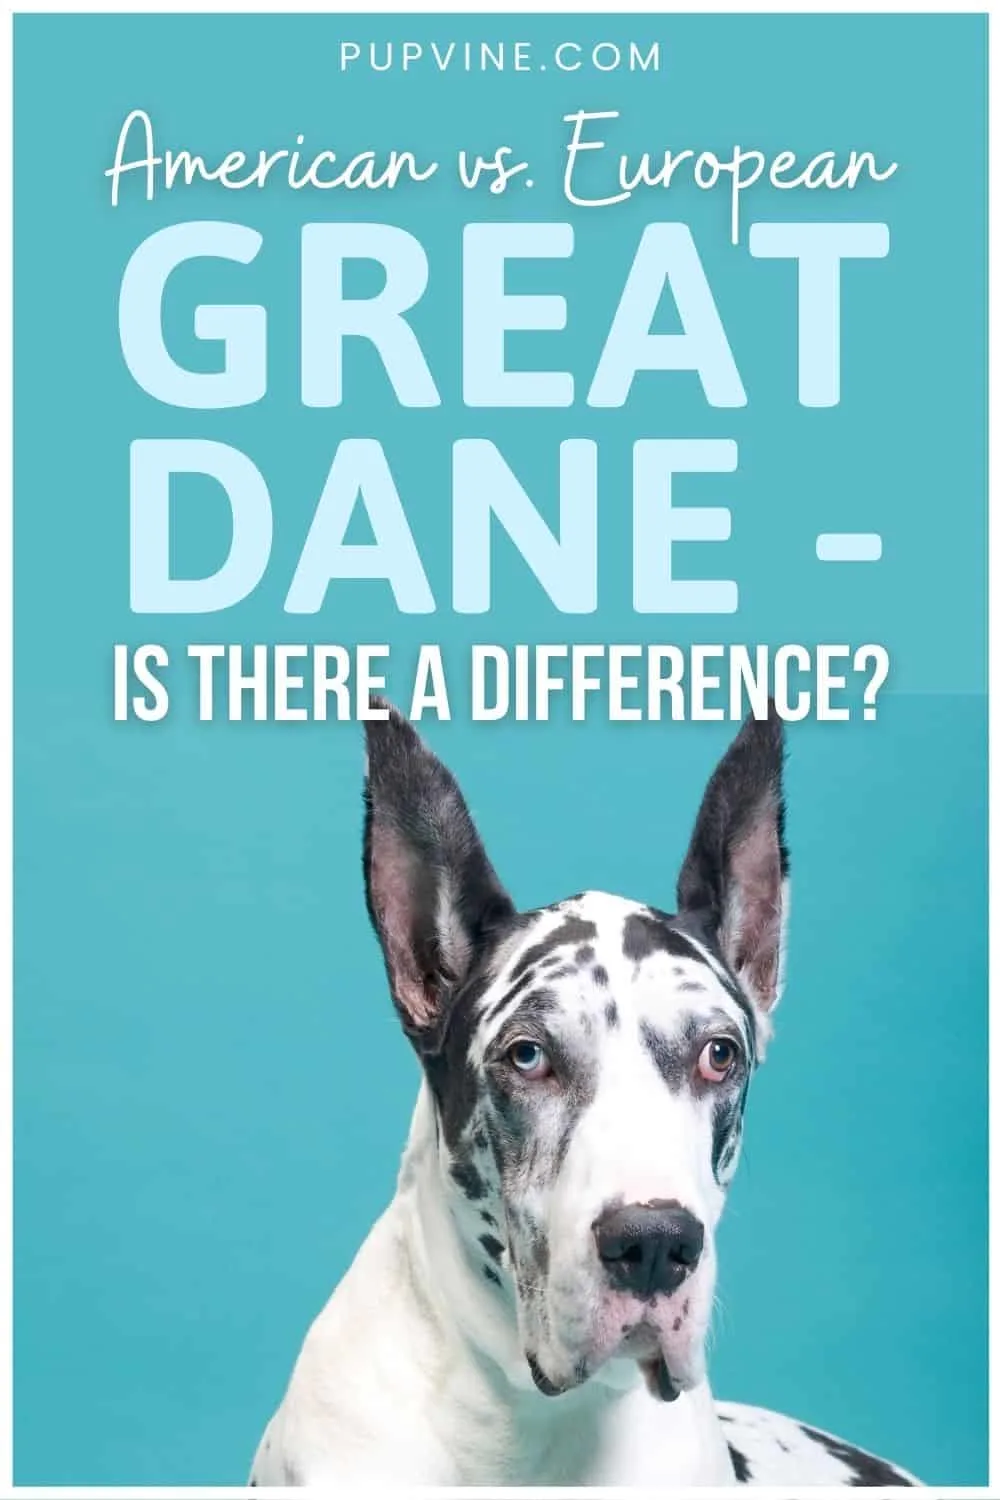 American Vs. European Great Dane - Is There a Difference